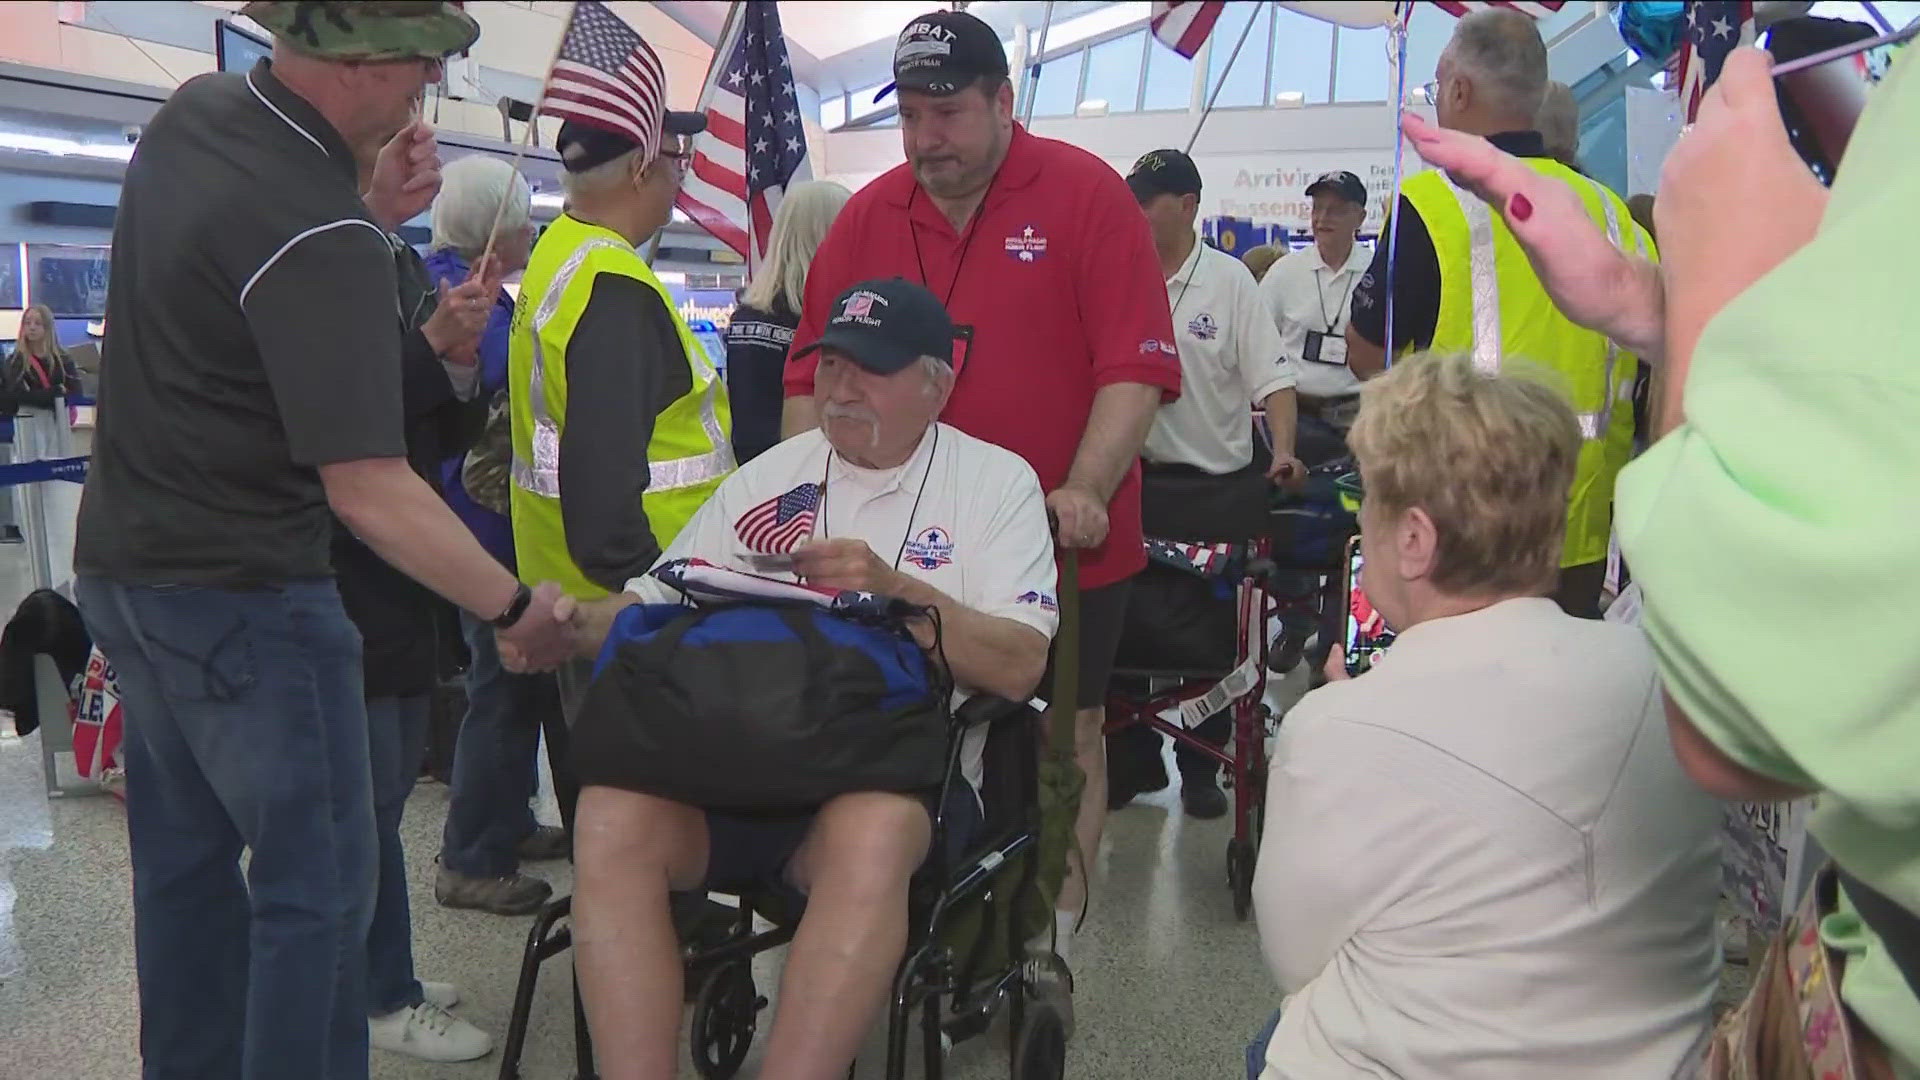 The regional Honor Flight organization held an emotional ceremony following the return of 36 vets that were flown to Washington DC to see their war memorials.